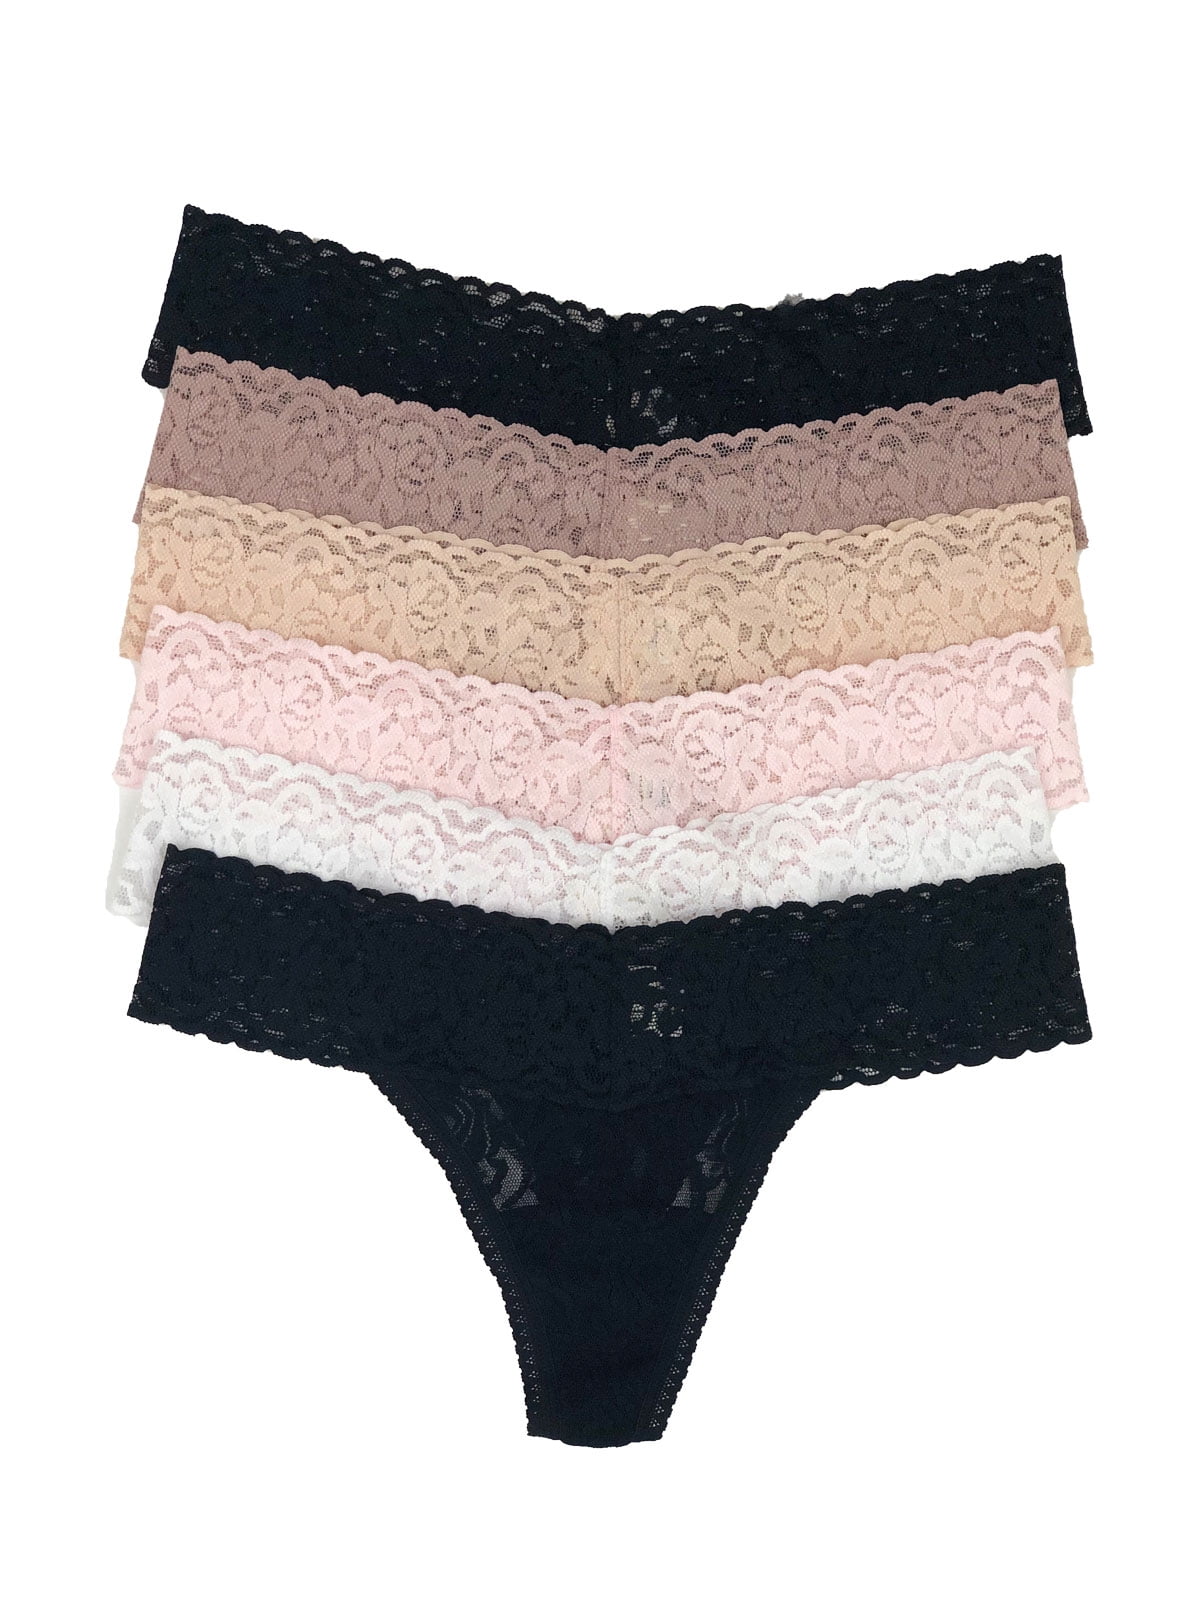  Victoria's Secret Lace Thong Panty Pack, Lay Flat Lace